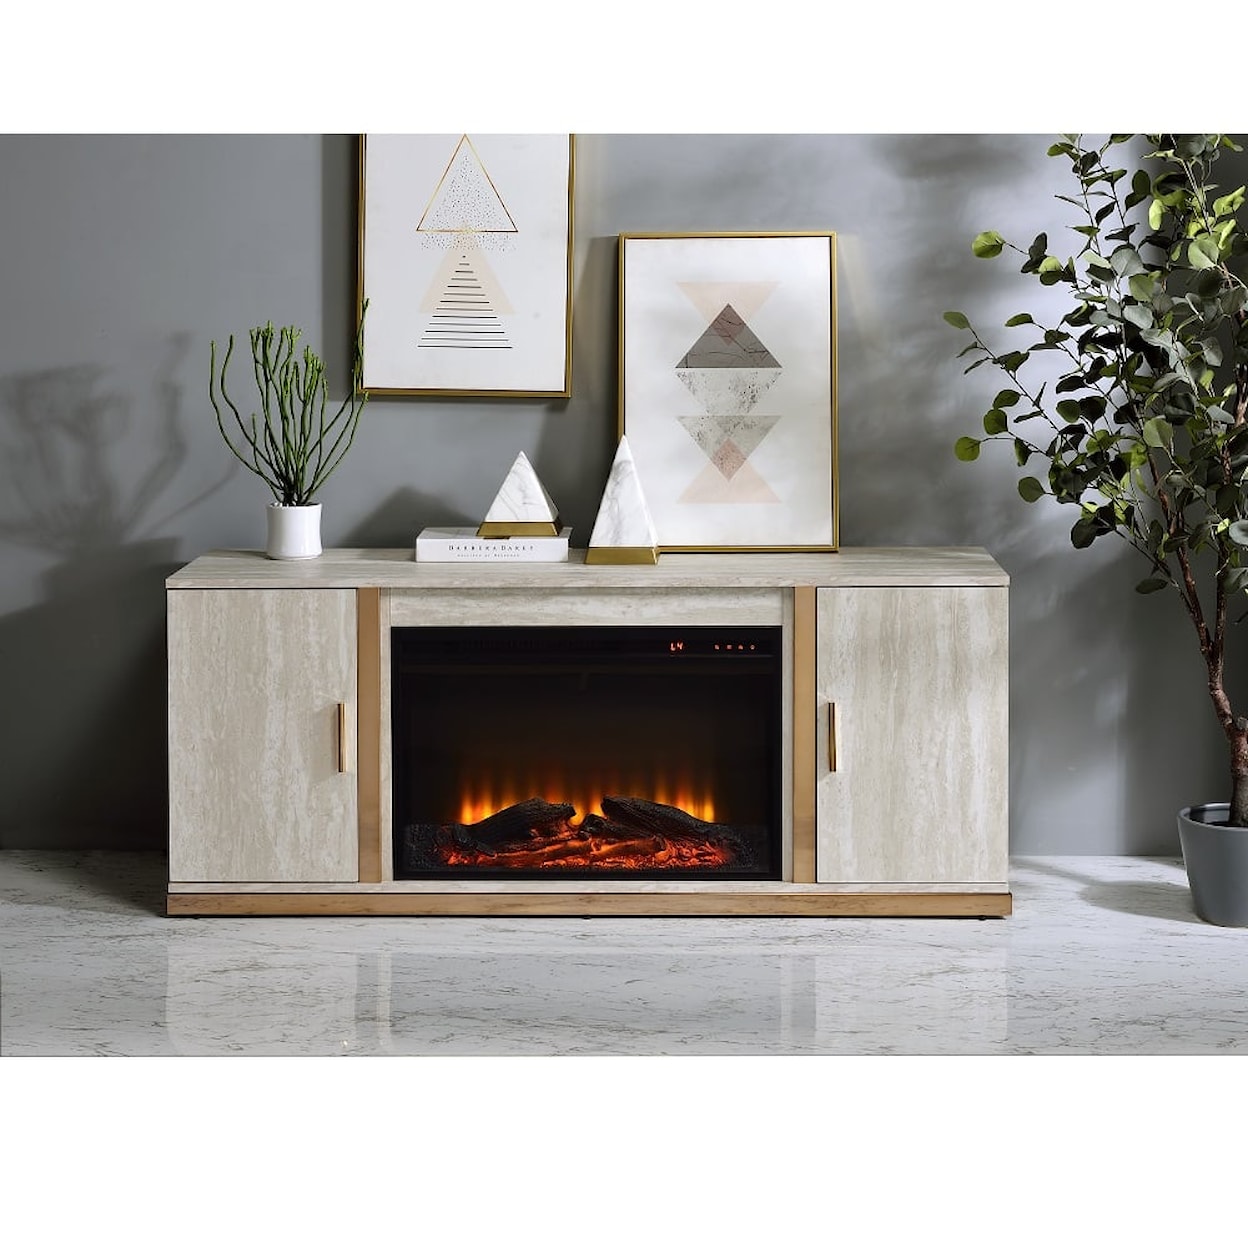 Acme Furniture Vanna Console Table W/Fireplace